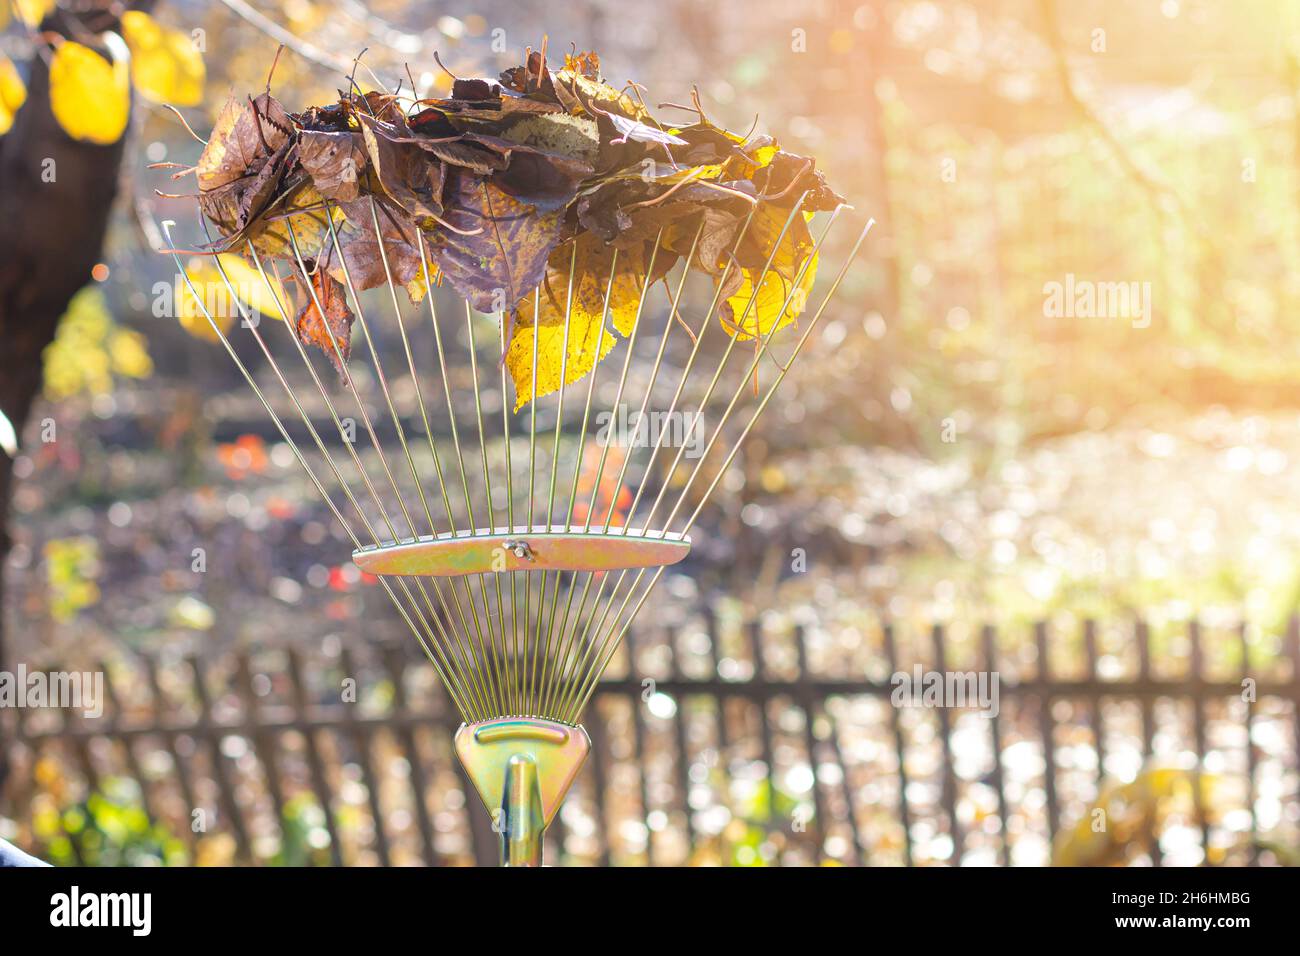 Cleaning of leaves. Rake with leaves. Sunlight. Autumn day. Stock Photo